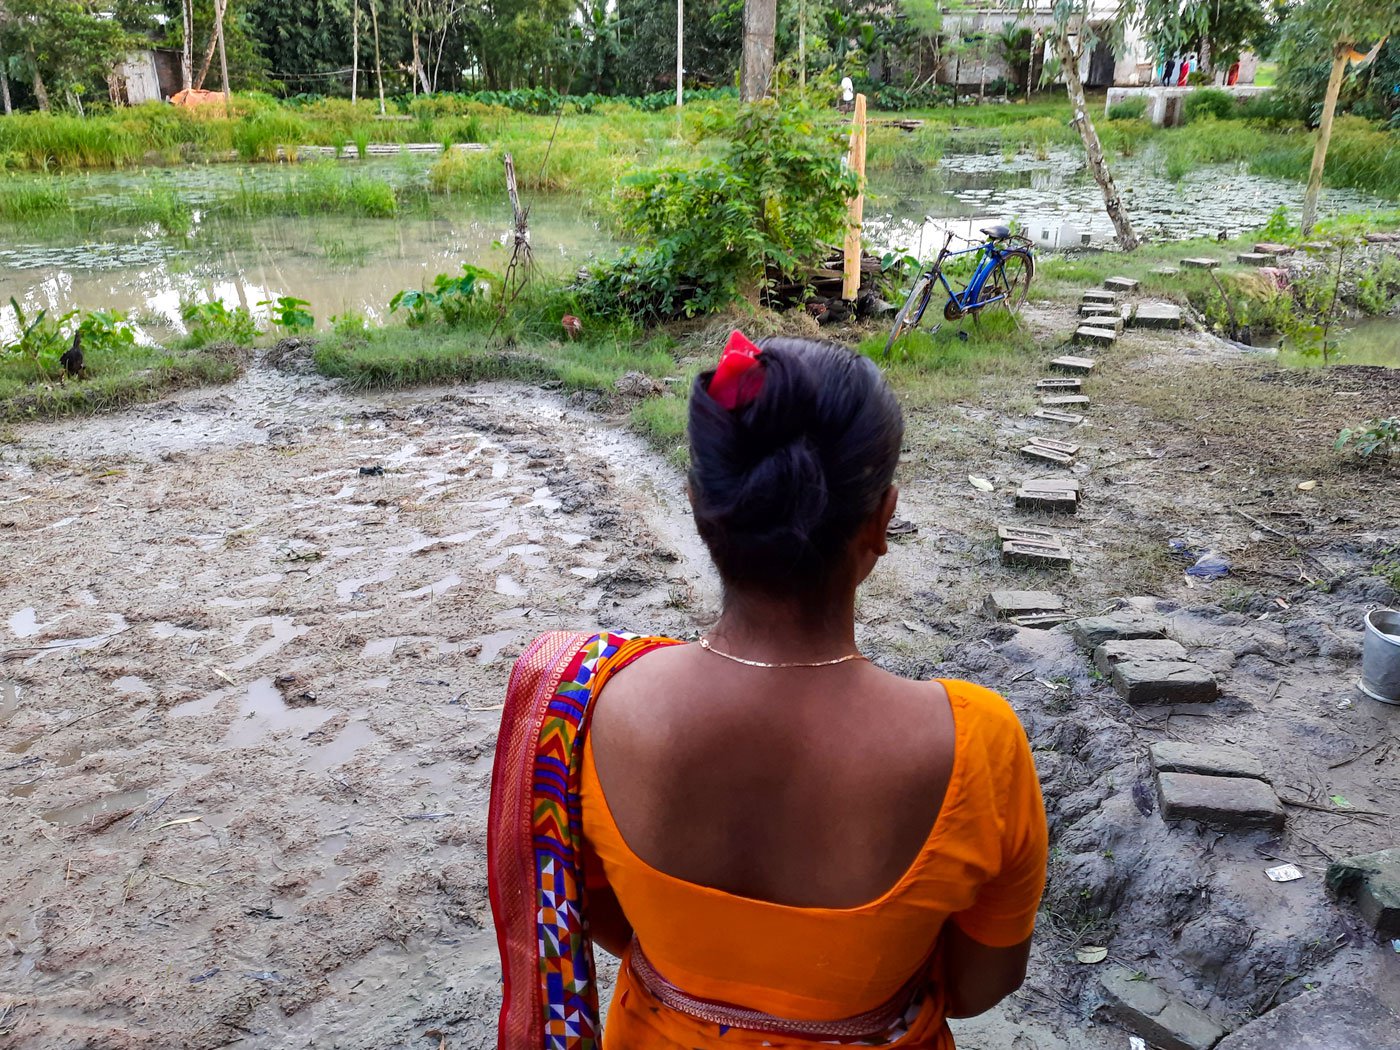 For women in the Sundarbans, their multiple health problems are compounded by the difficulties in accessing healthcare